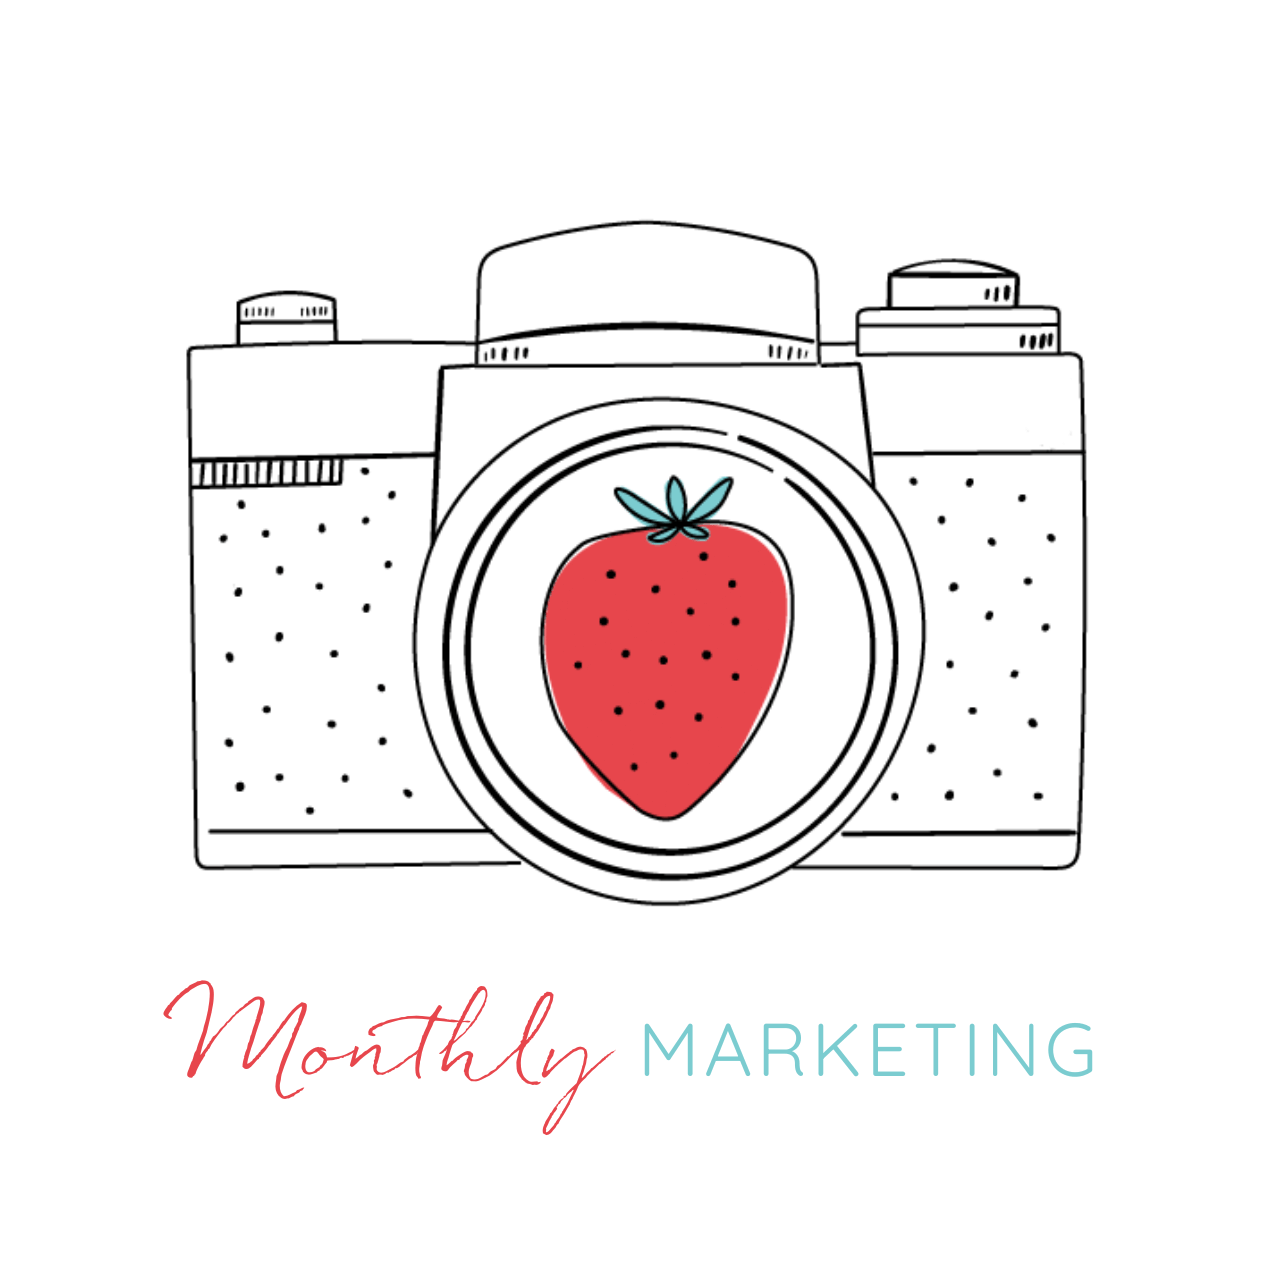 Photography marketing tips for the month February